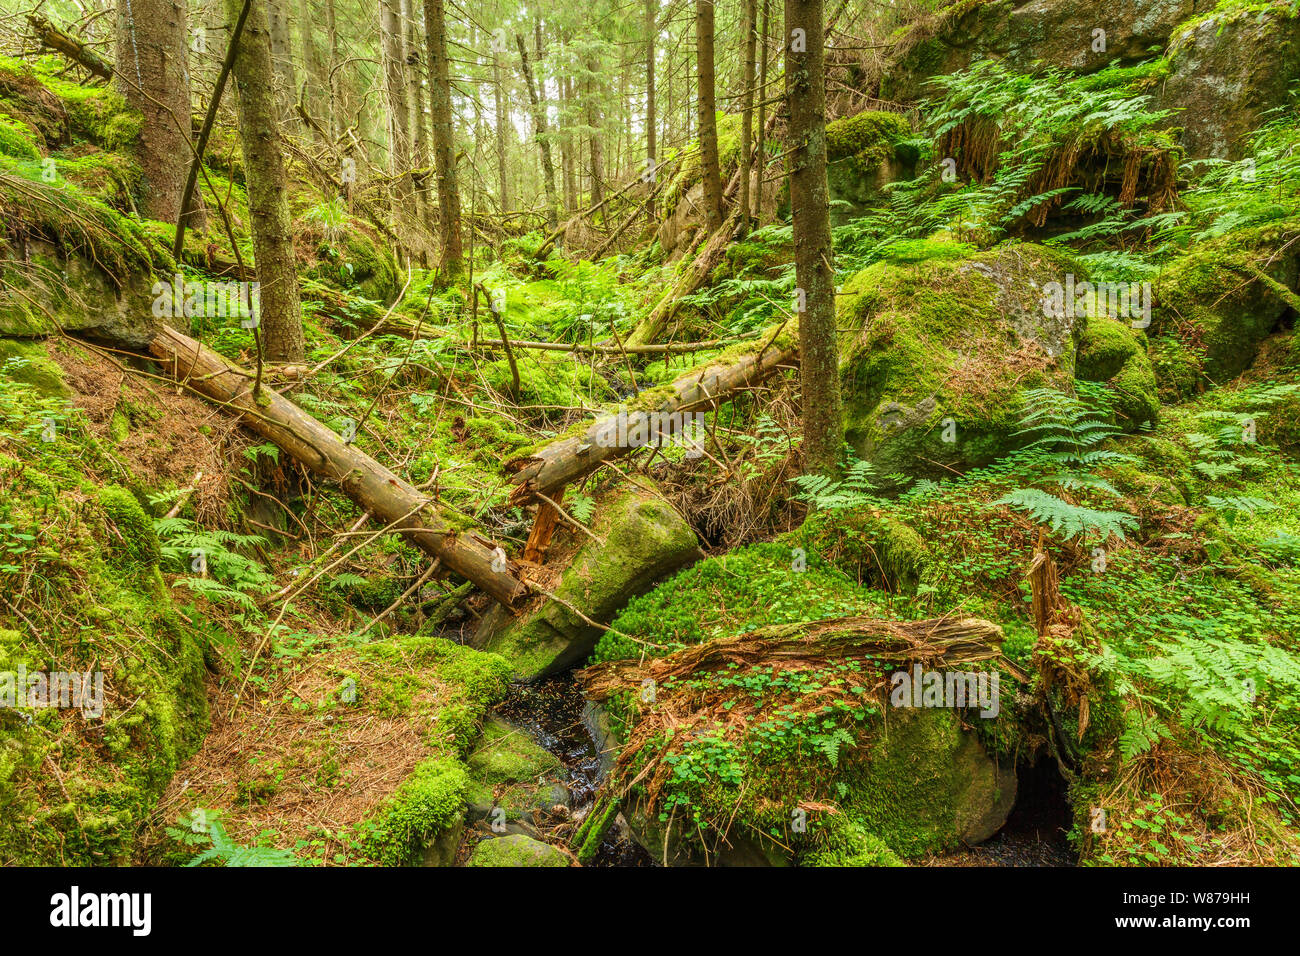 Falling trees in a ravine in an old forest Stock Photo